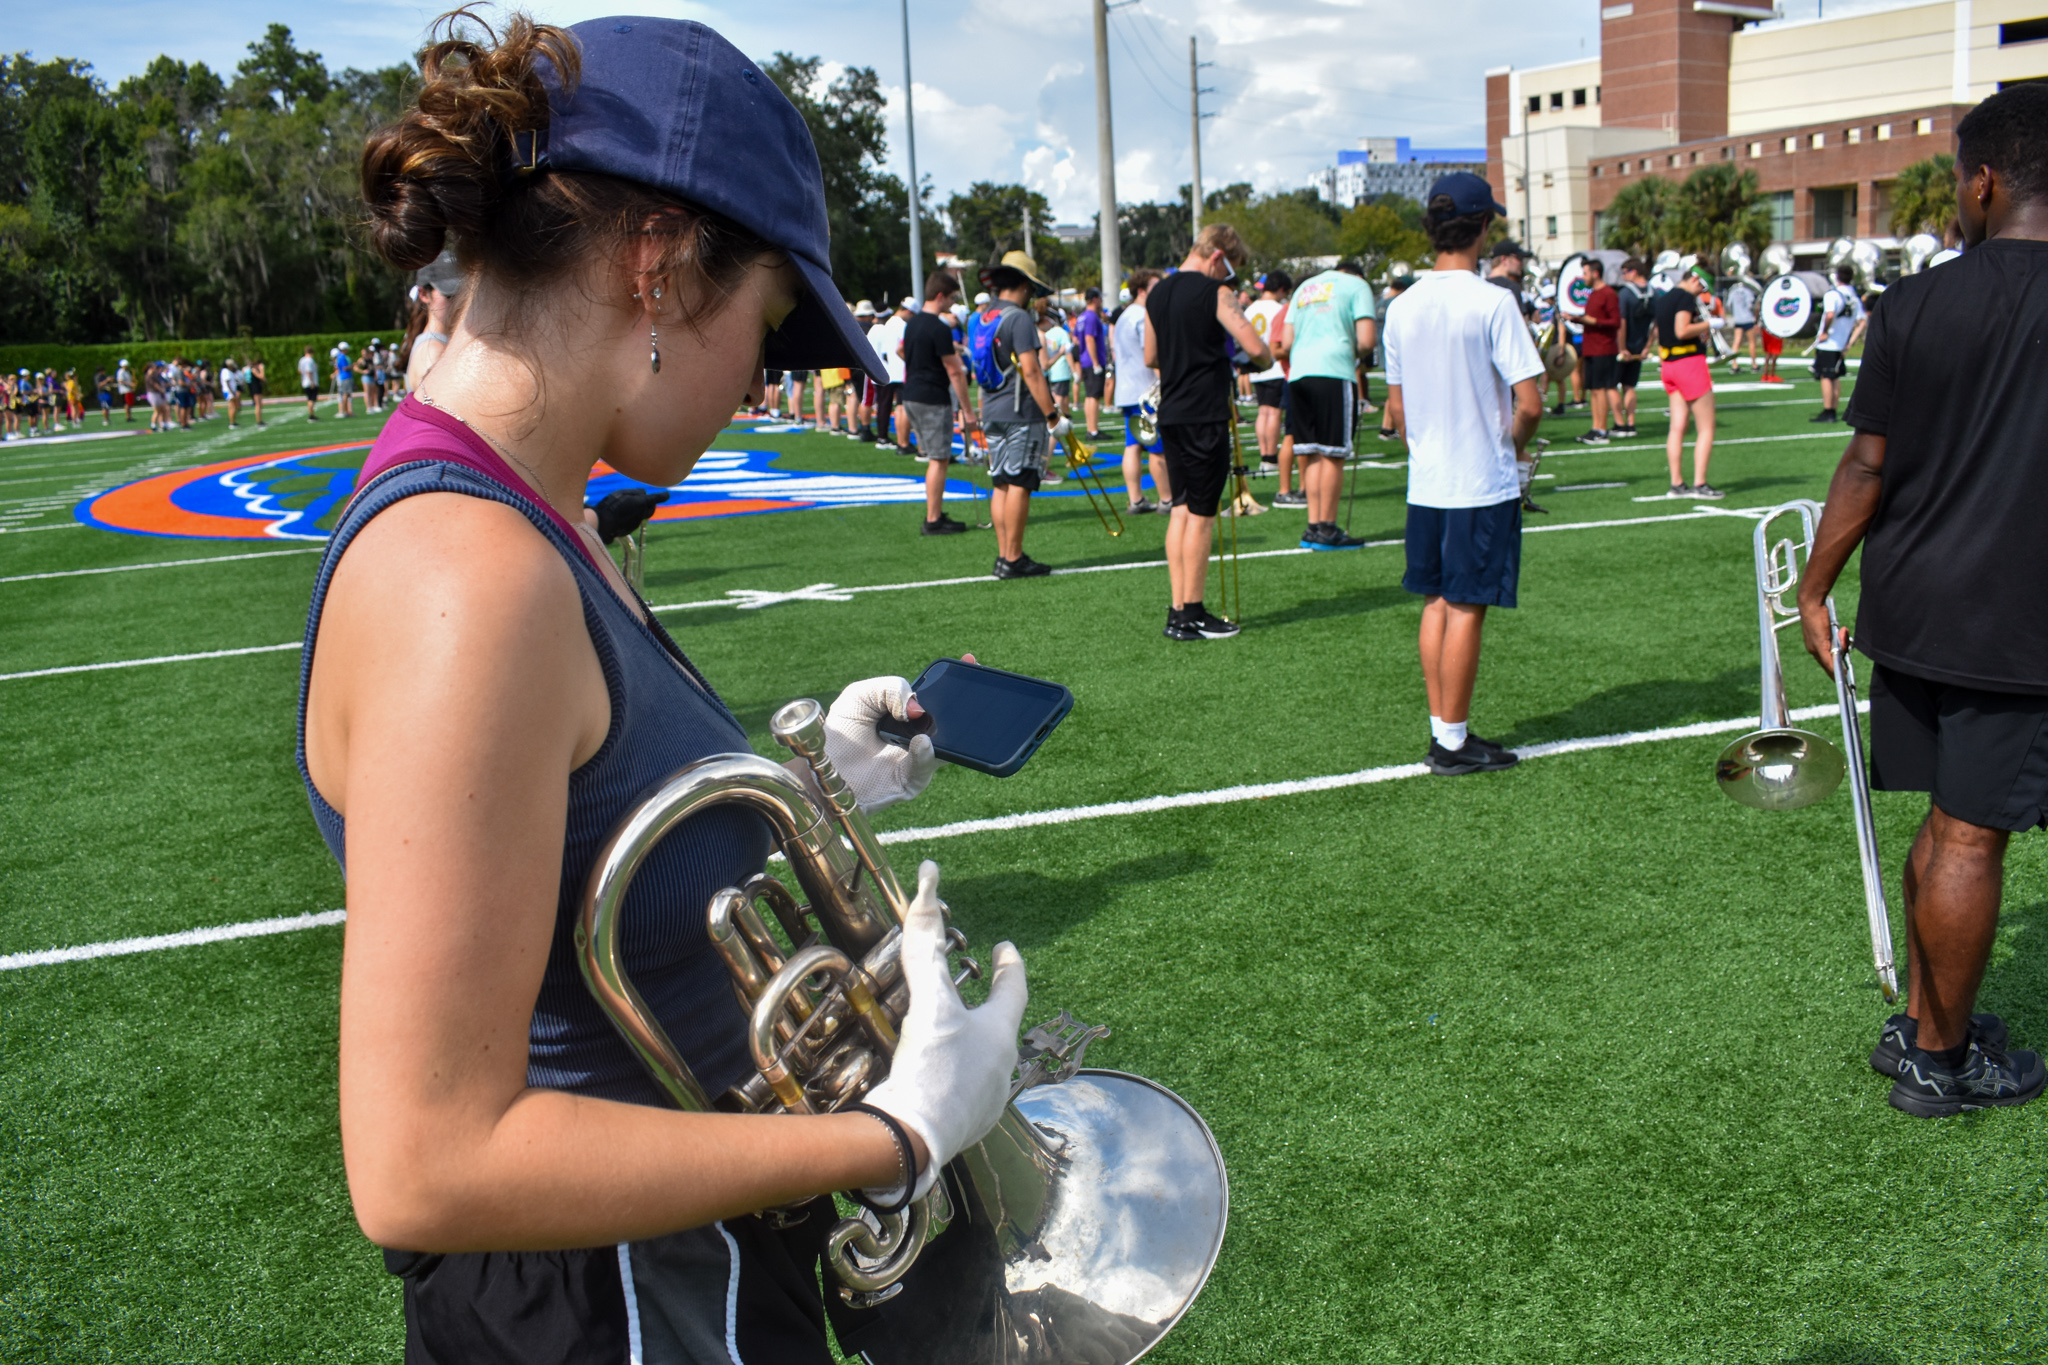 A student holding a mellophone looks at her phone on a football field.